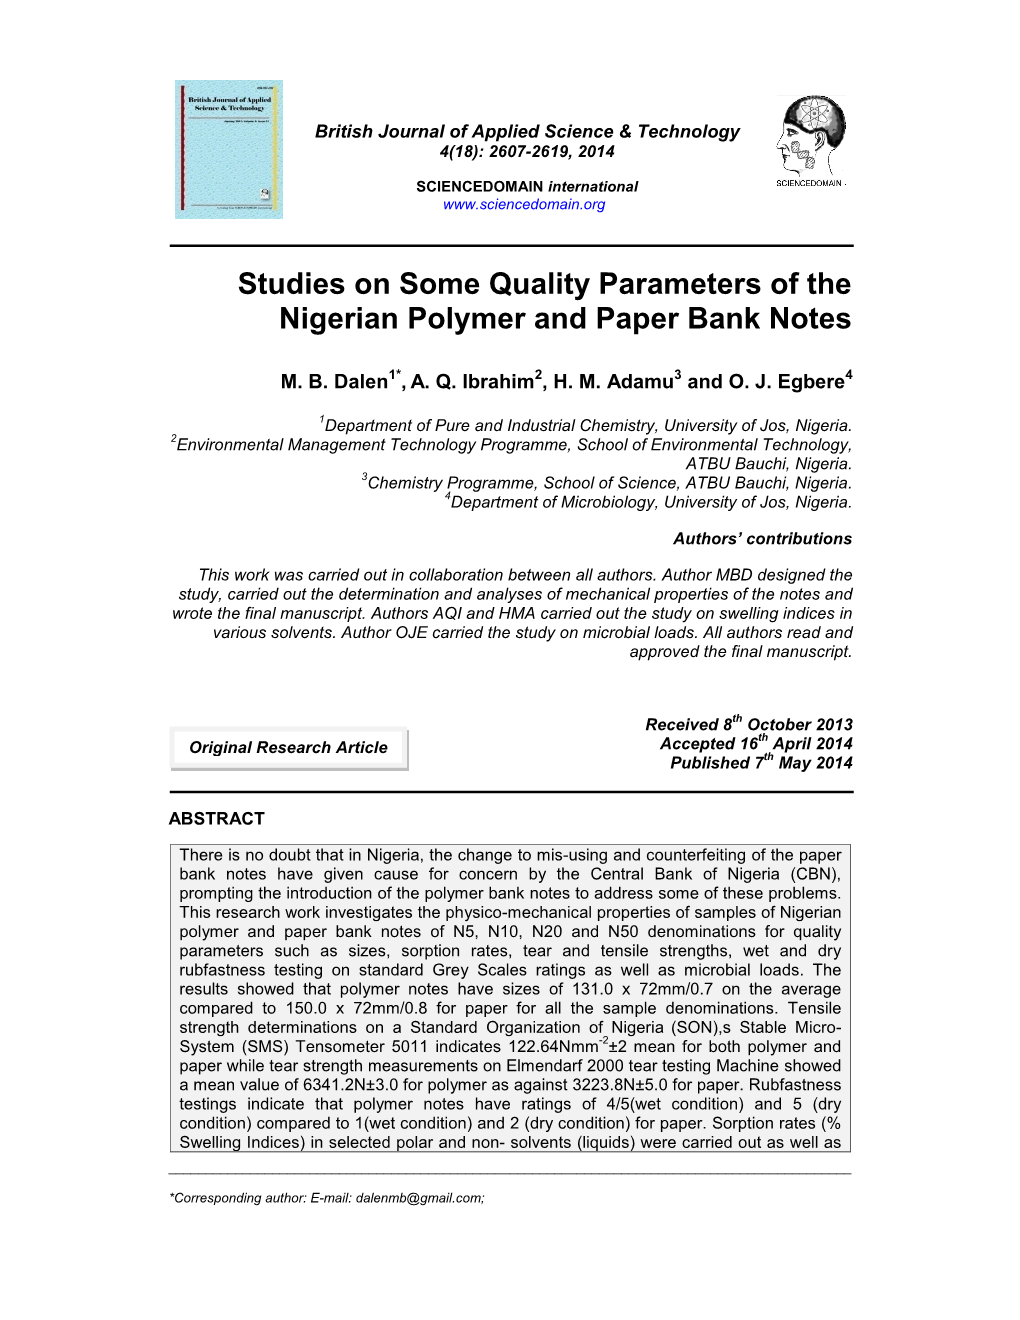 Studies on Some Quality Parameters of the Nigerian Polymer and Paper Bank Notes